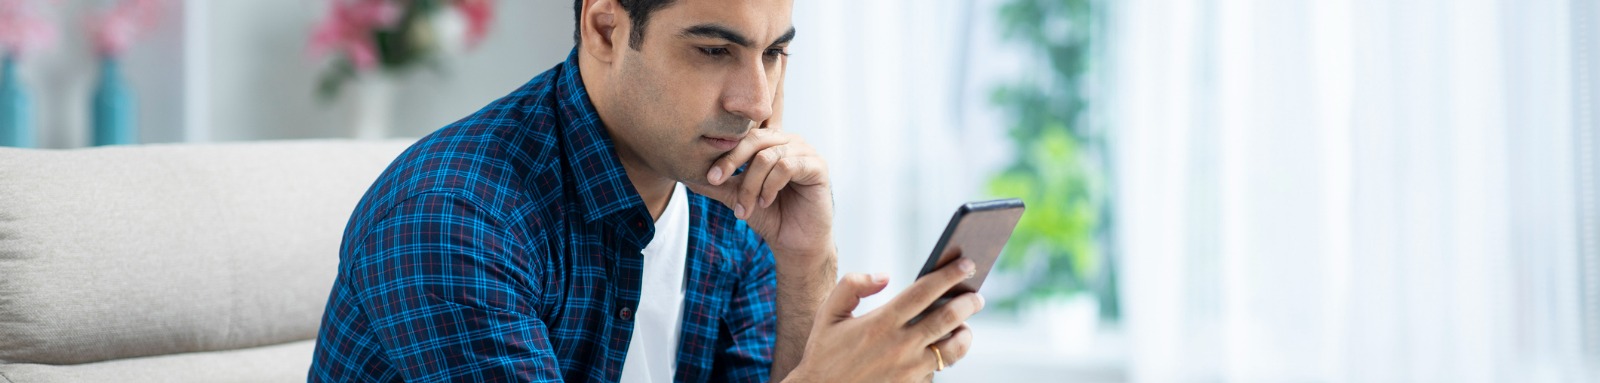 Man looking at his phone at home with a serious expression